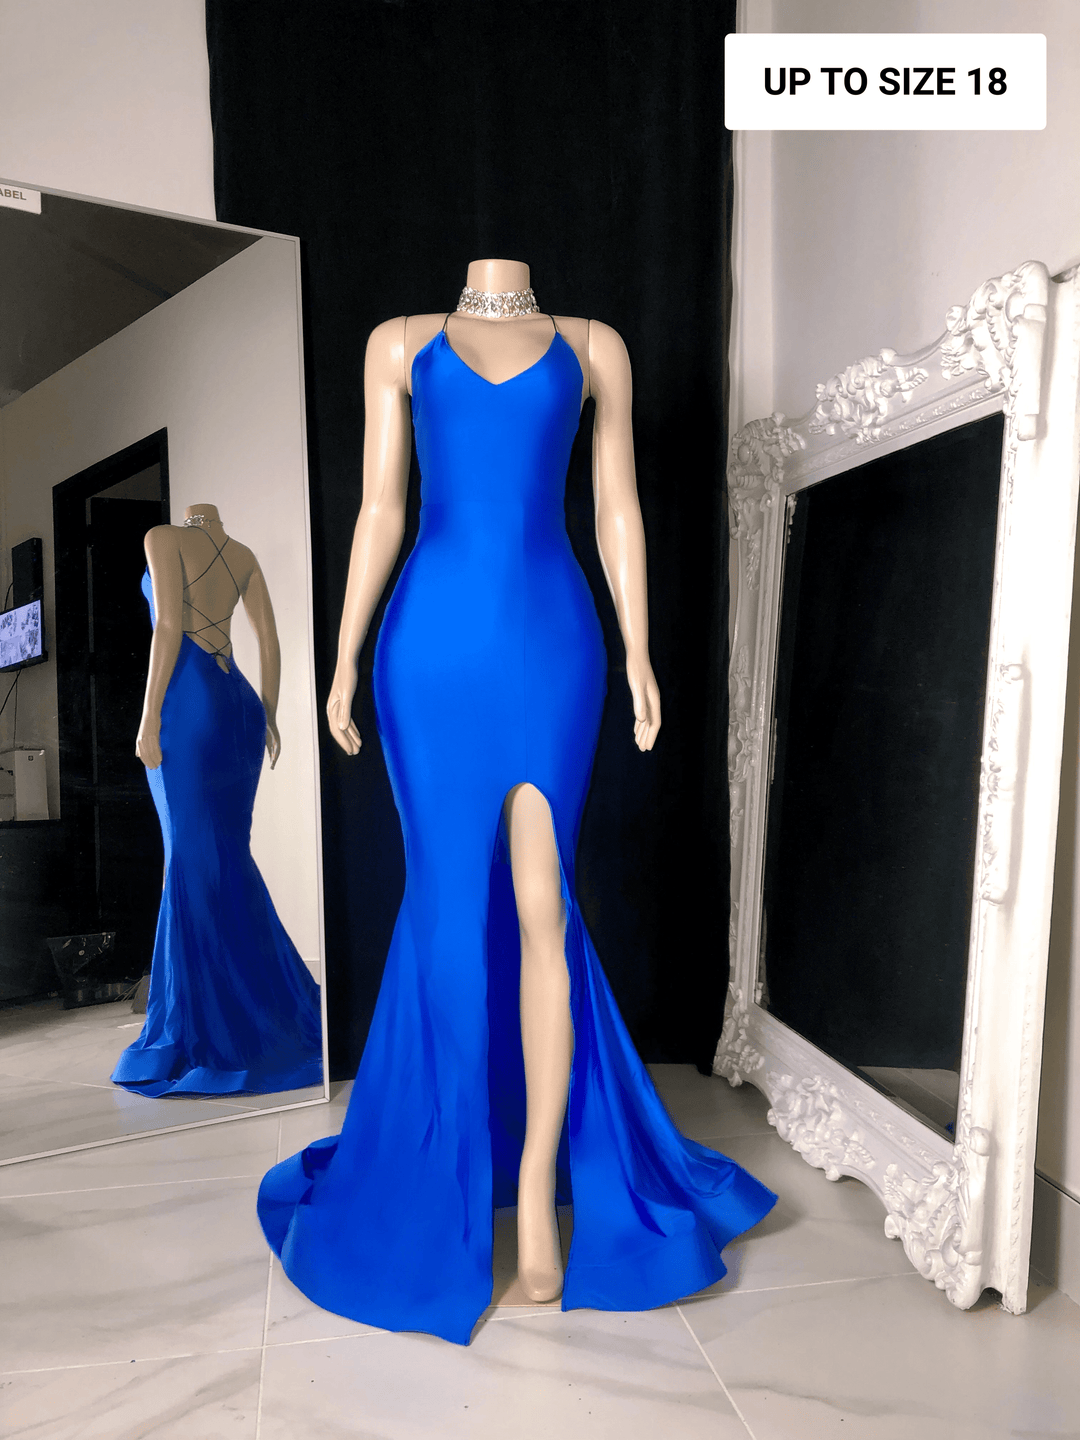 The CAROLINE Gown